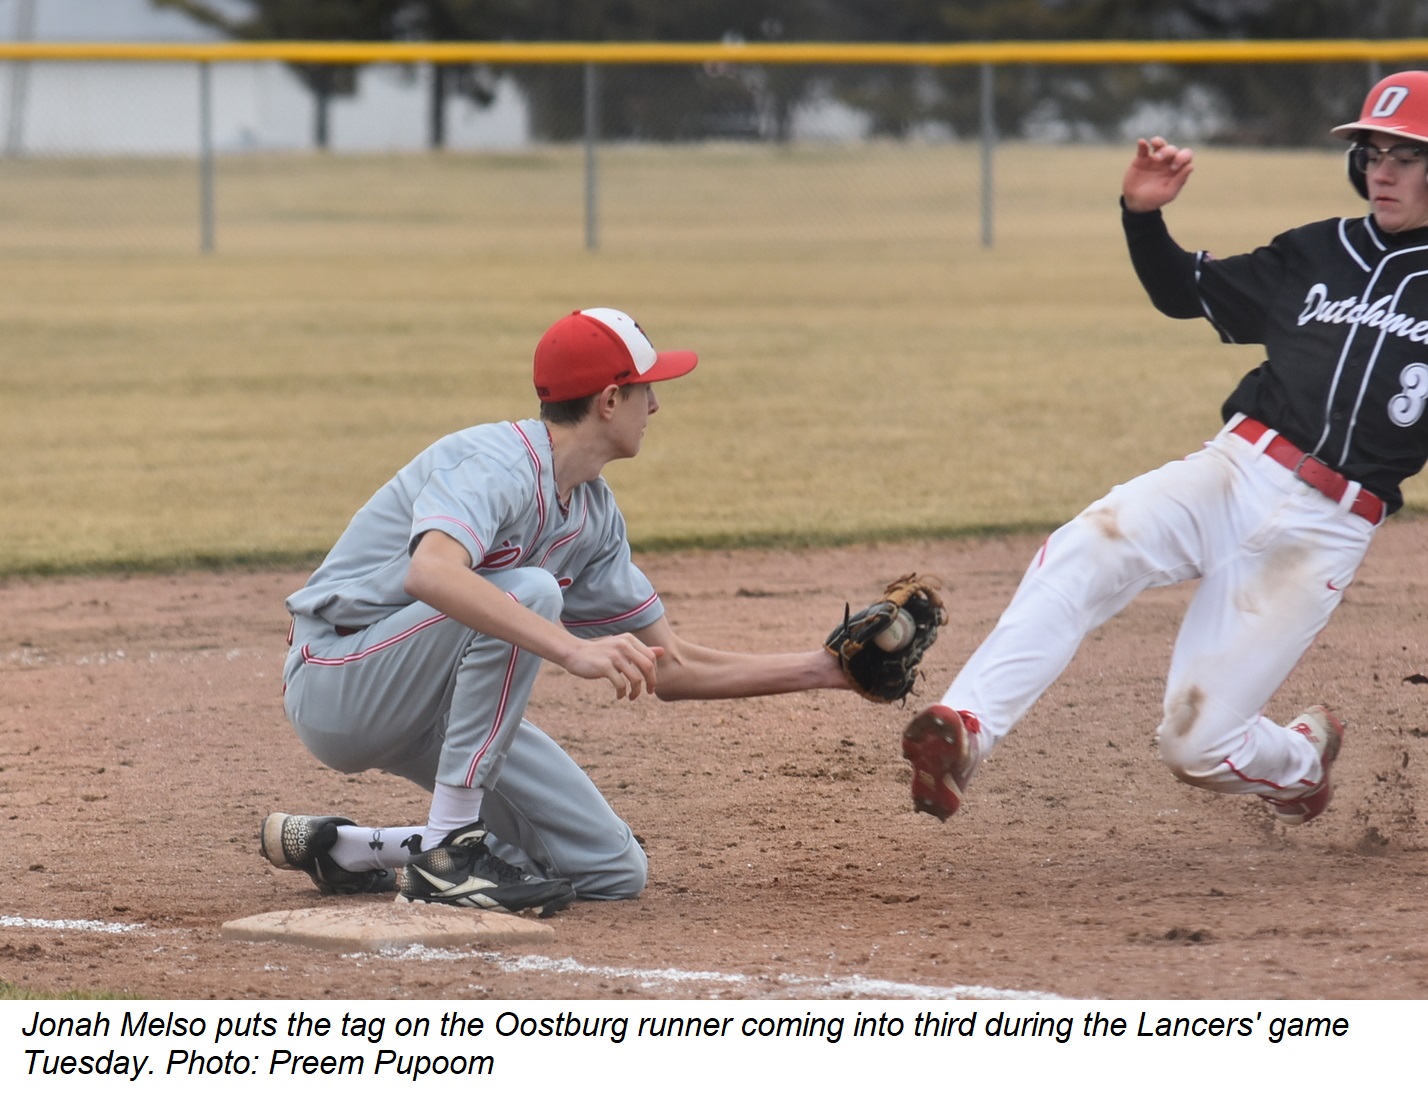 Jonah Melso puts the tag on the Oostburg base runner.